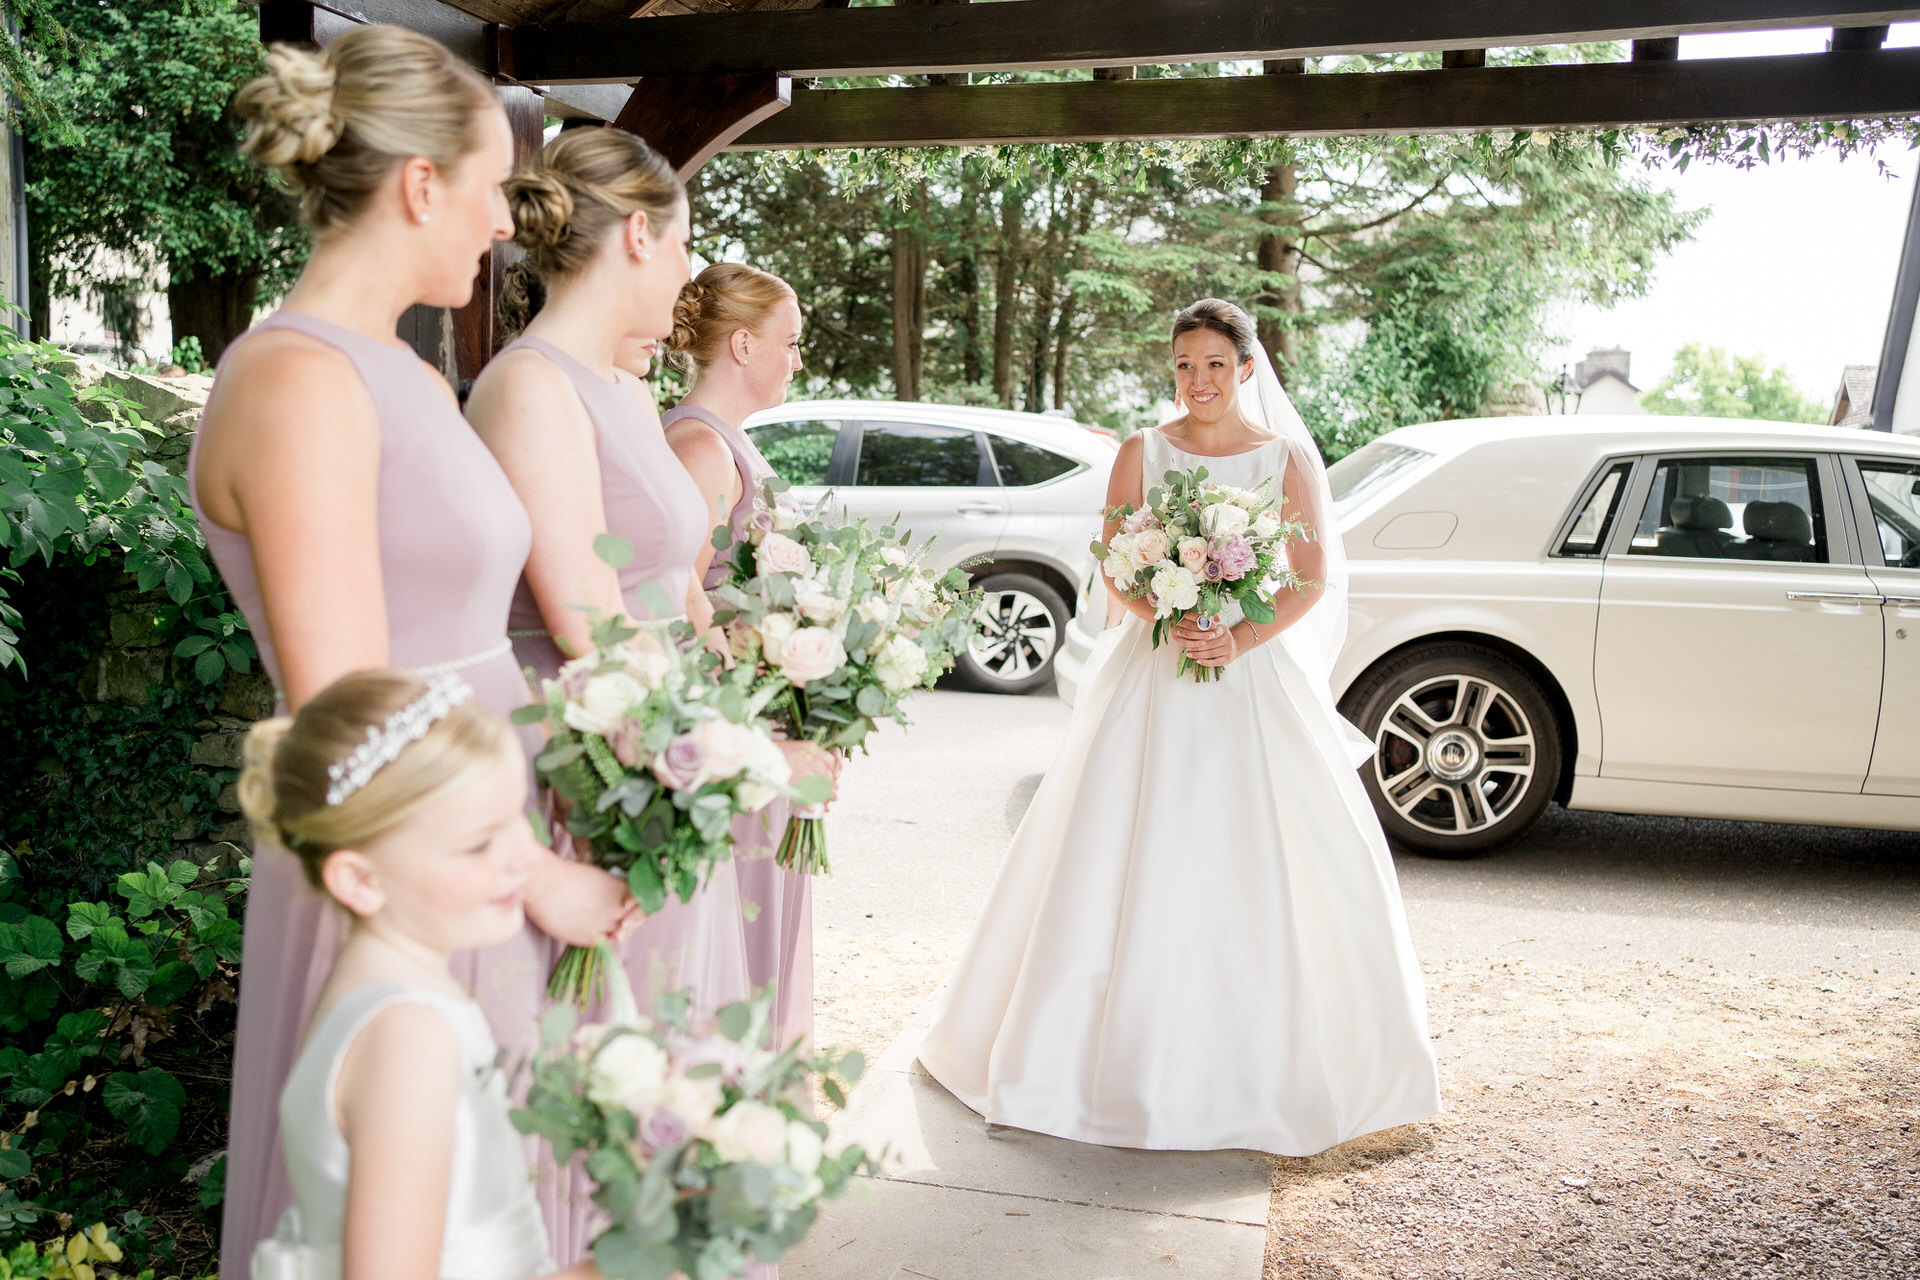 Bride arriving at church at st johns in Levens, greeted by her bridesmaids